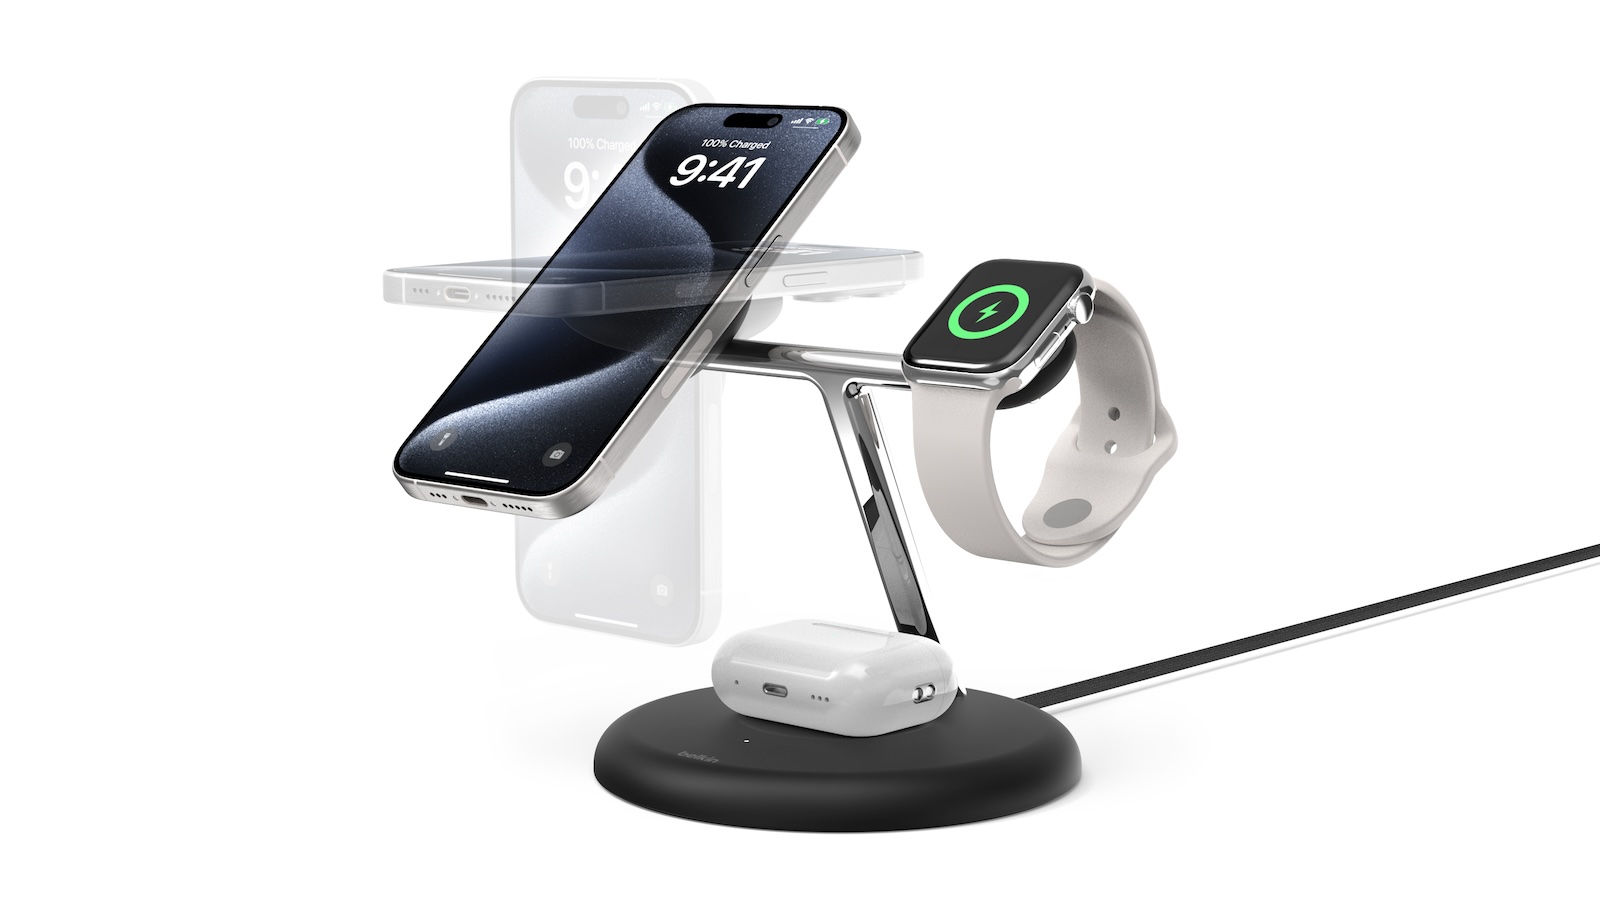 Belkin's convertible wireless charger supports new Qi2 magnet